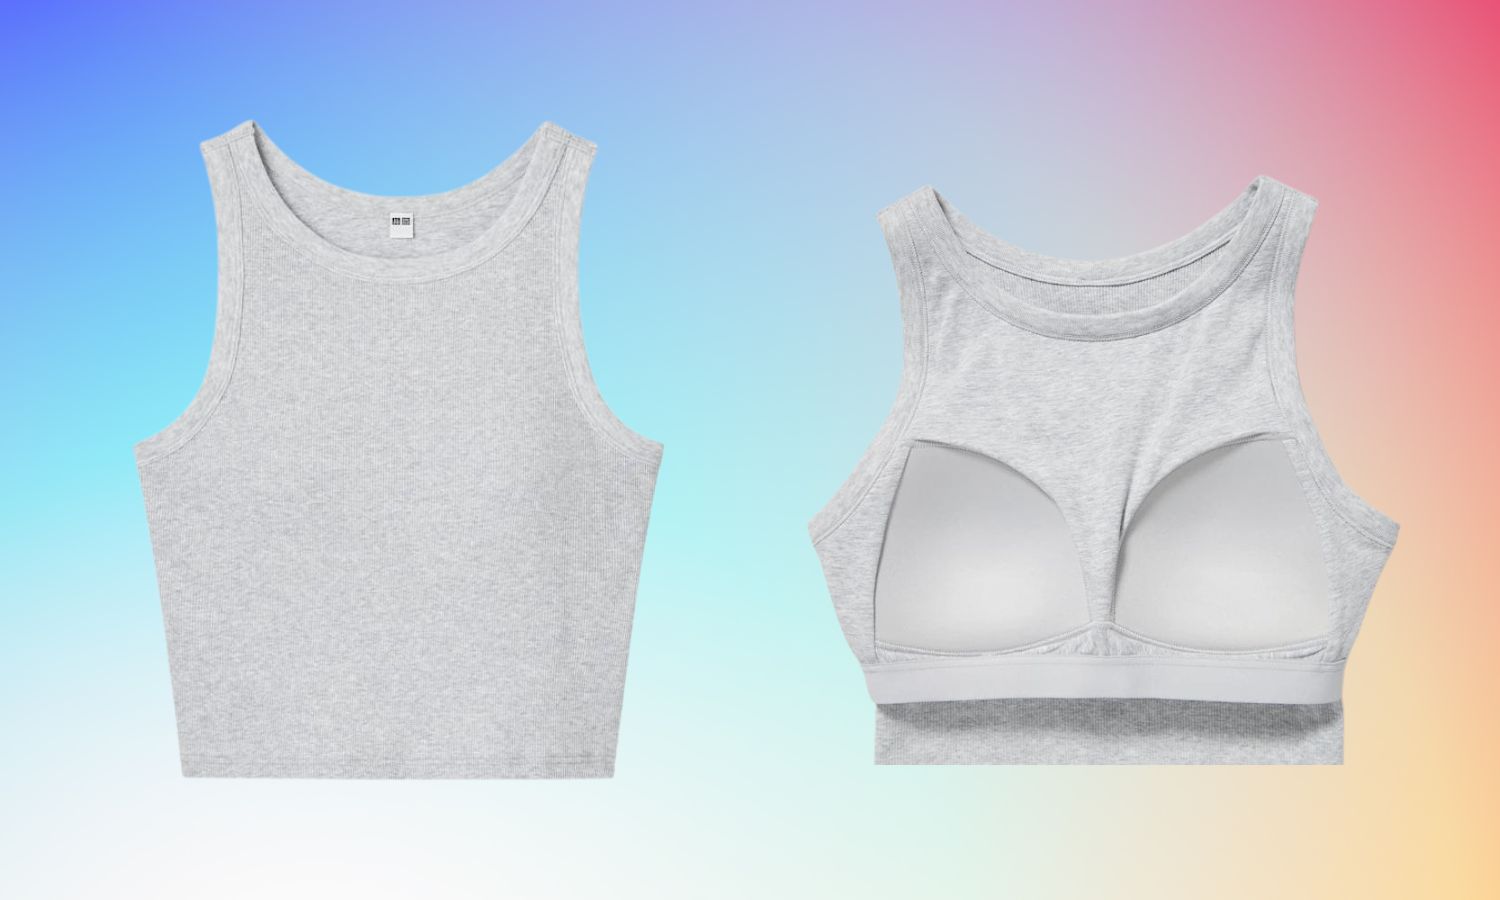 2023 new tank with built-in bra, tank top bra, tank top with built